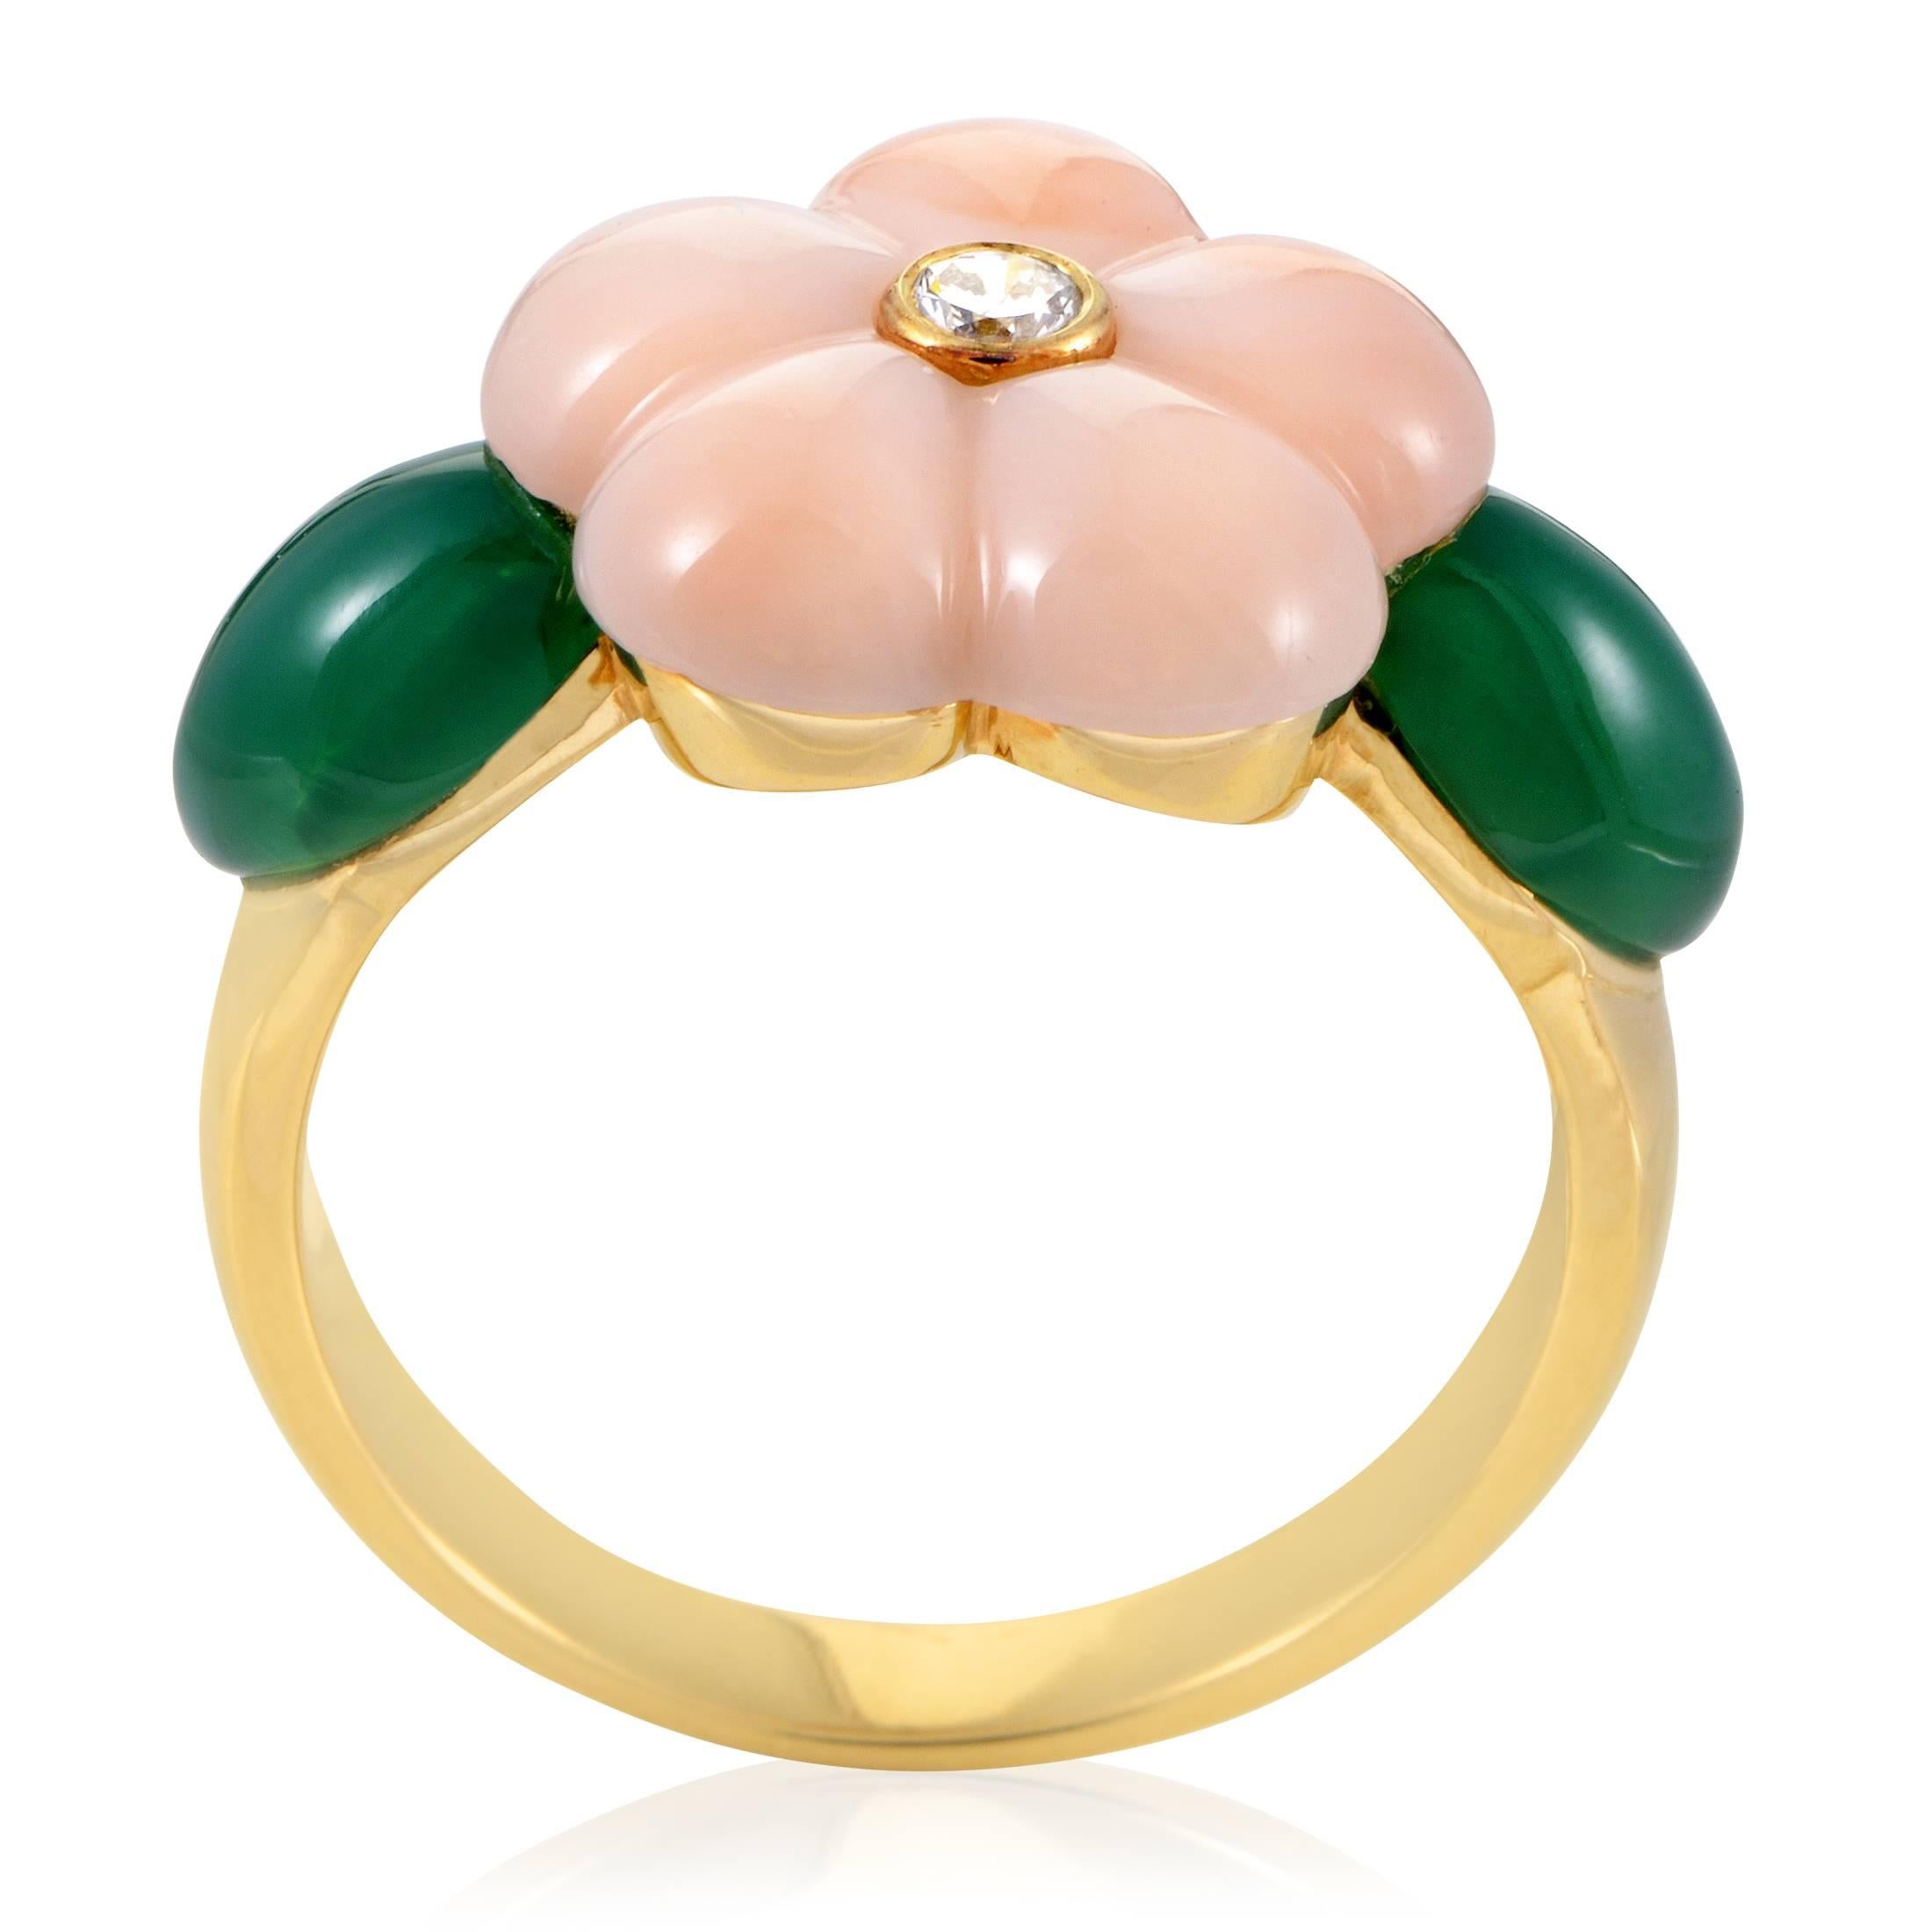 Creating a vivacious and charming depiction of a flower by employing the tender coral and splendid green chrysoprase stones, Van Cleef & Arpels present this delightfully feminine and colorful 18K yellow gold ring that also boasts a 0.08ct diamond